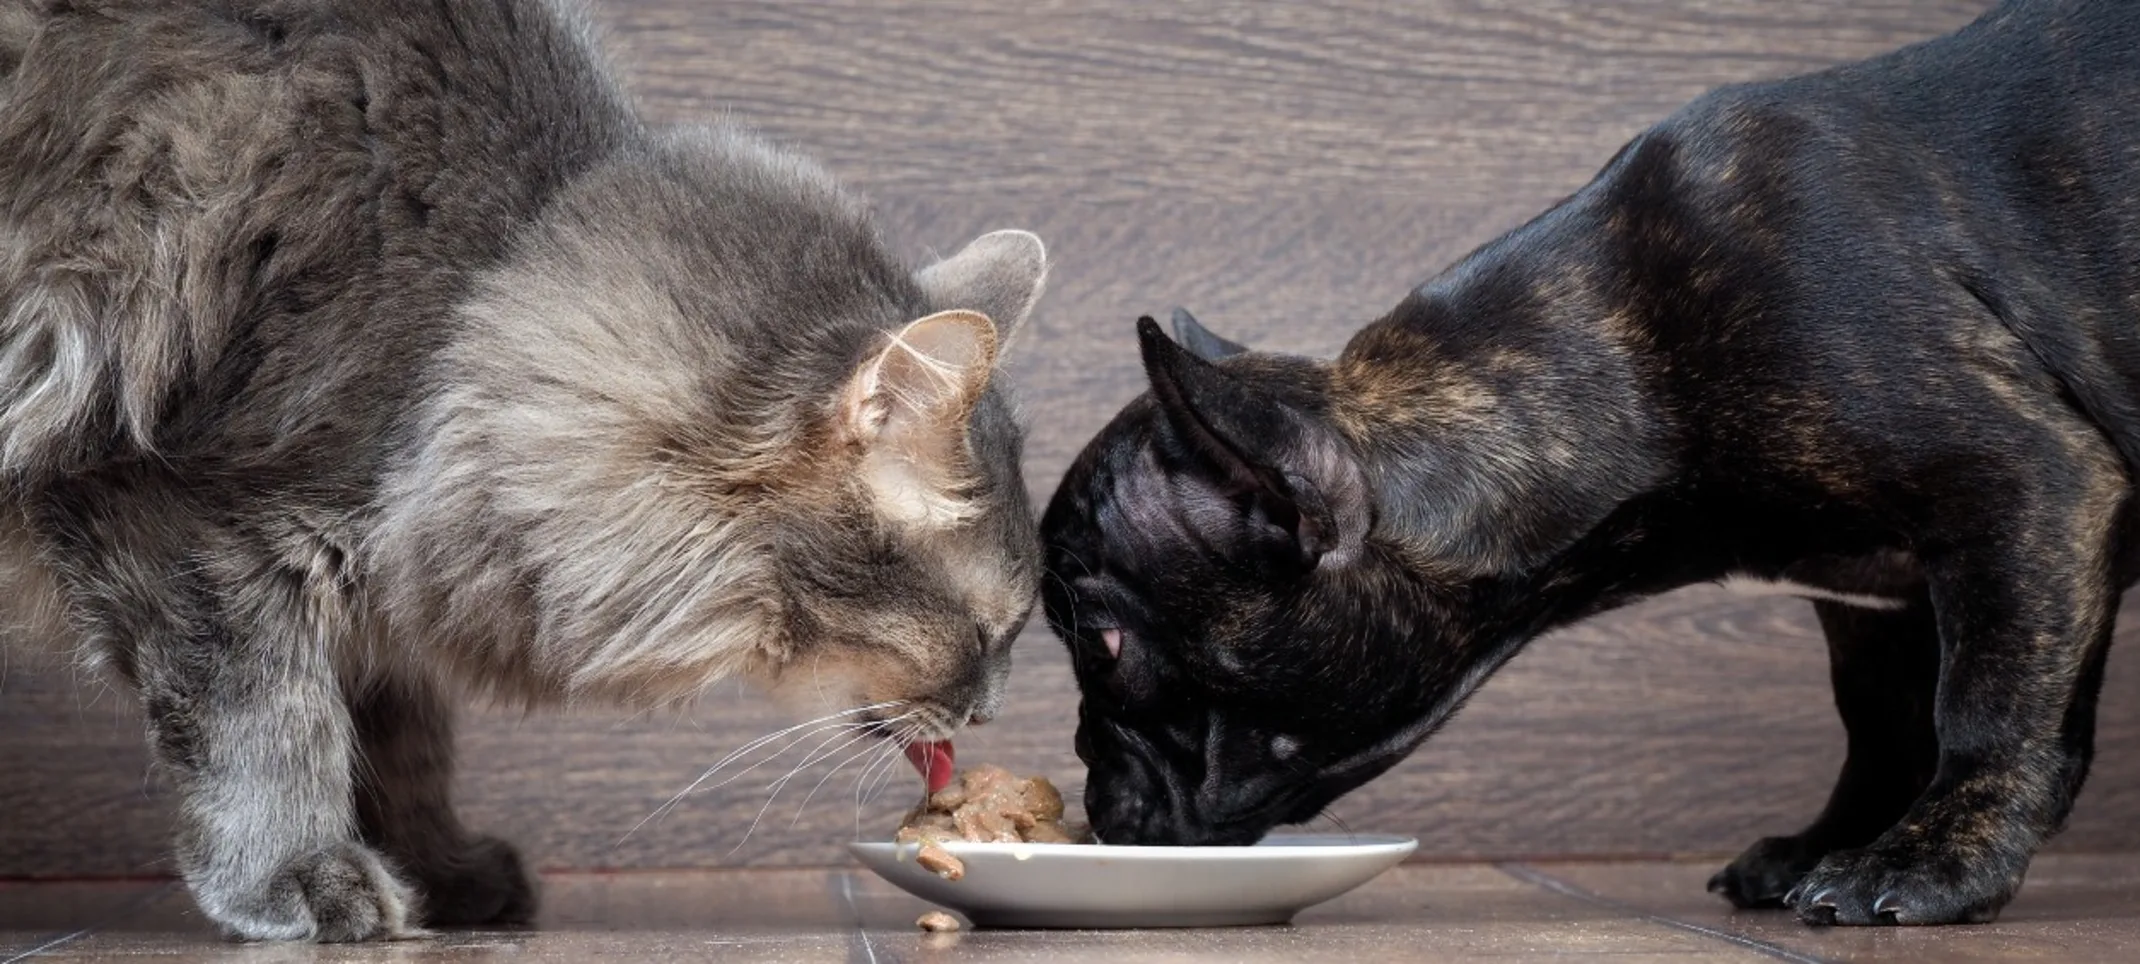 Dog and Cat Eating Out of a Bowl